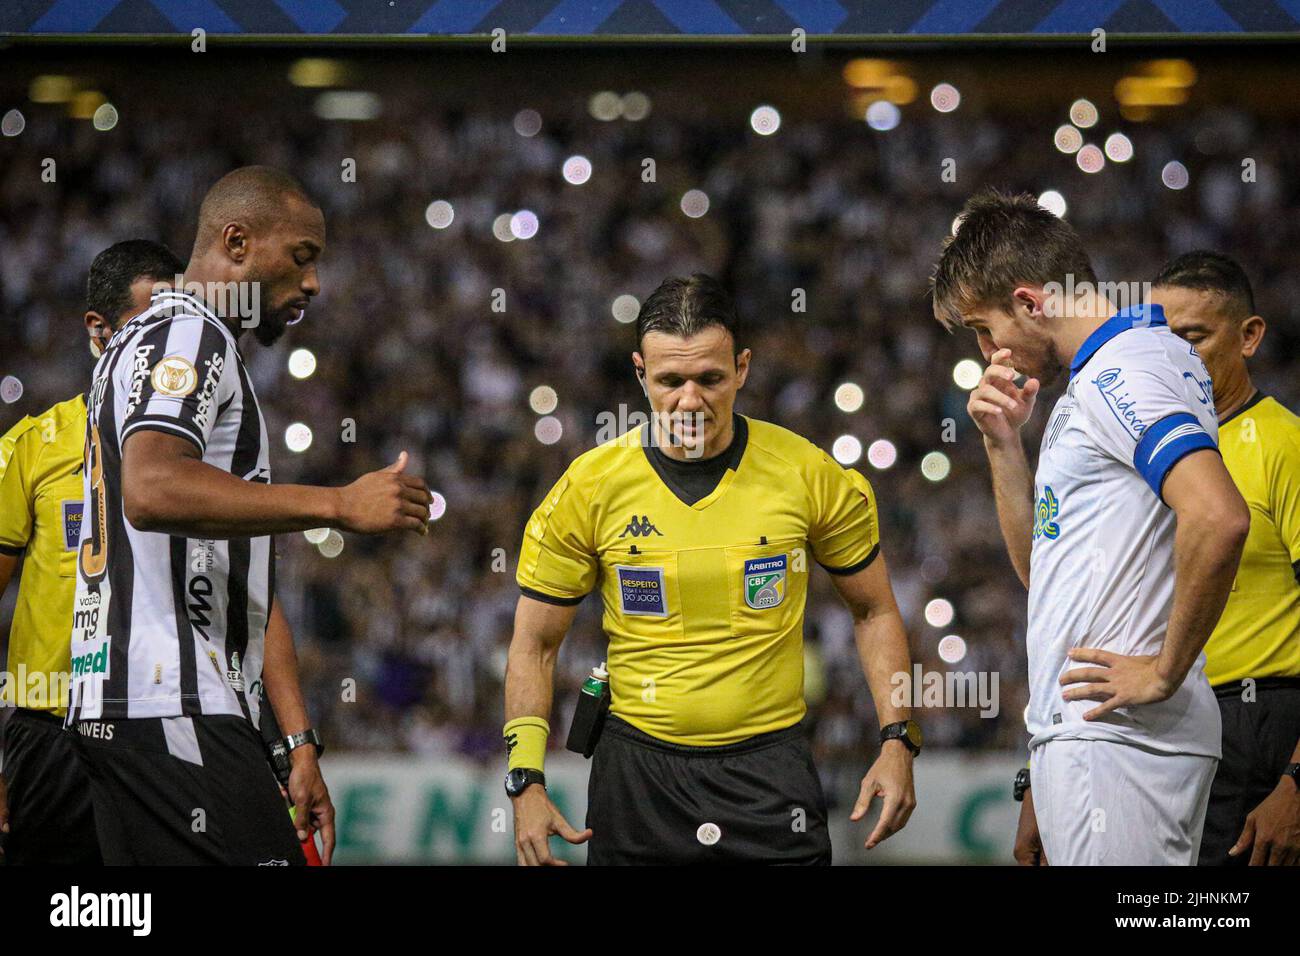 Fortaleza, Brazil. 19th July, 2022. CE - Fortaleza - 07/19/2022 - BRAZILIAN A 2022, CEARA X AVAI - Referee Caio Max during a match between Ceara and Avai at the Arena Castelao stadium for the Brazilian championship A 2022. Photo: Lucas Emanuel/AGIF/Sipa USA Credit: Sipa USA/Alamy Live News Stock Photo